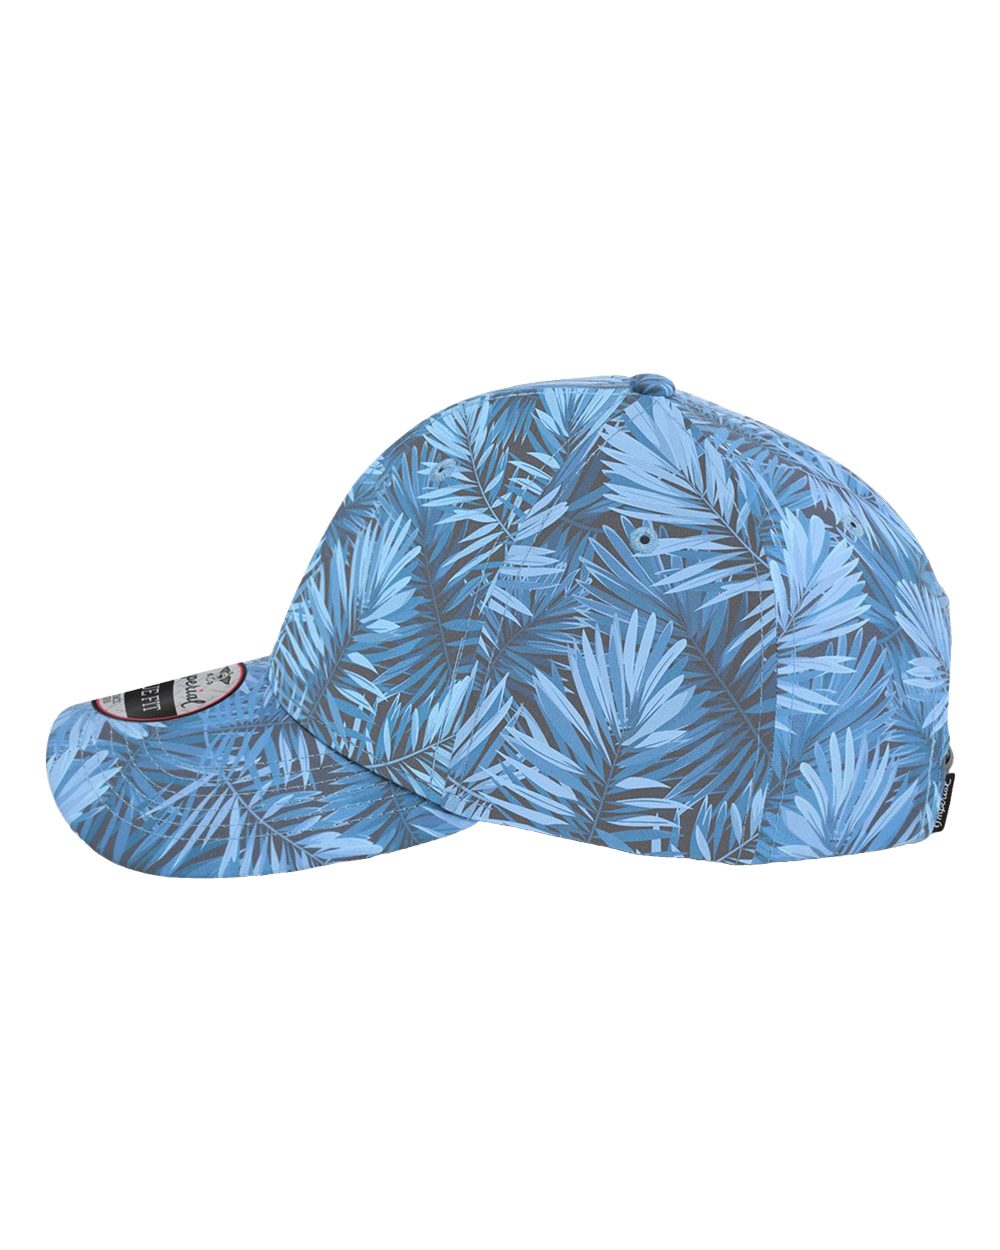 Imperial 4065 - The Mahalo Performance Cap